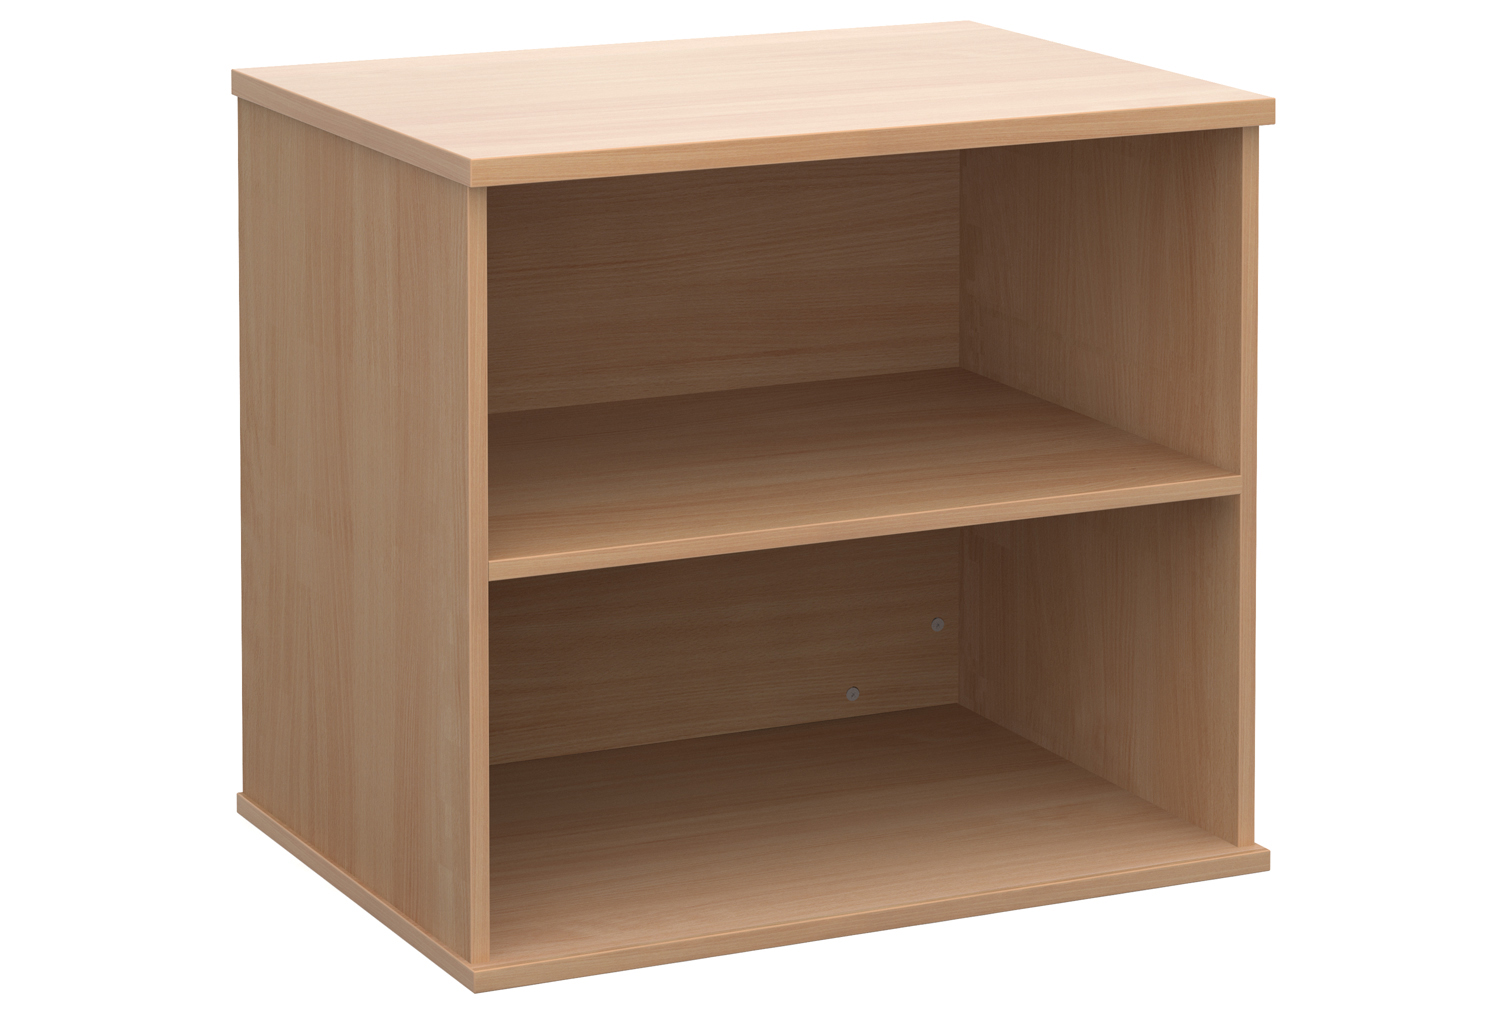 Value Line 1 Shelf Office Bookcases, Beech, Express Delivery